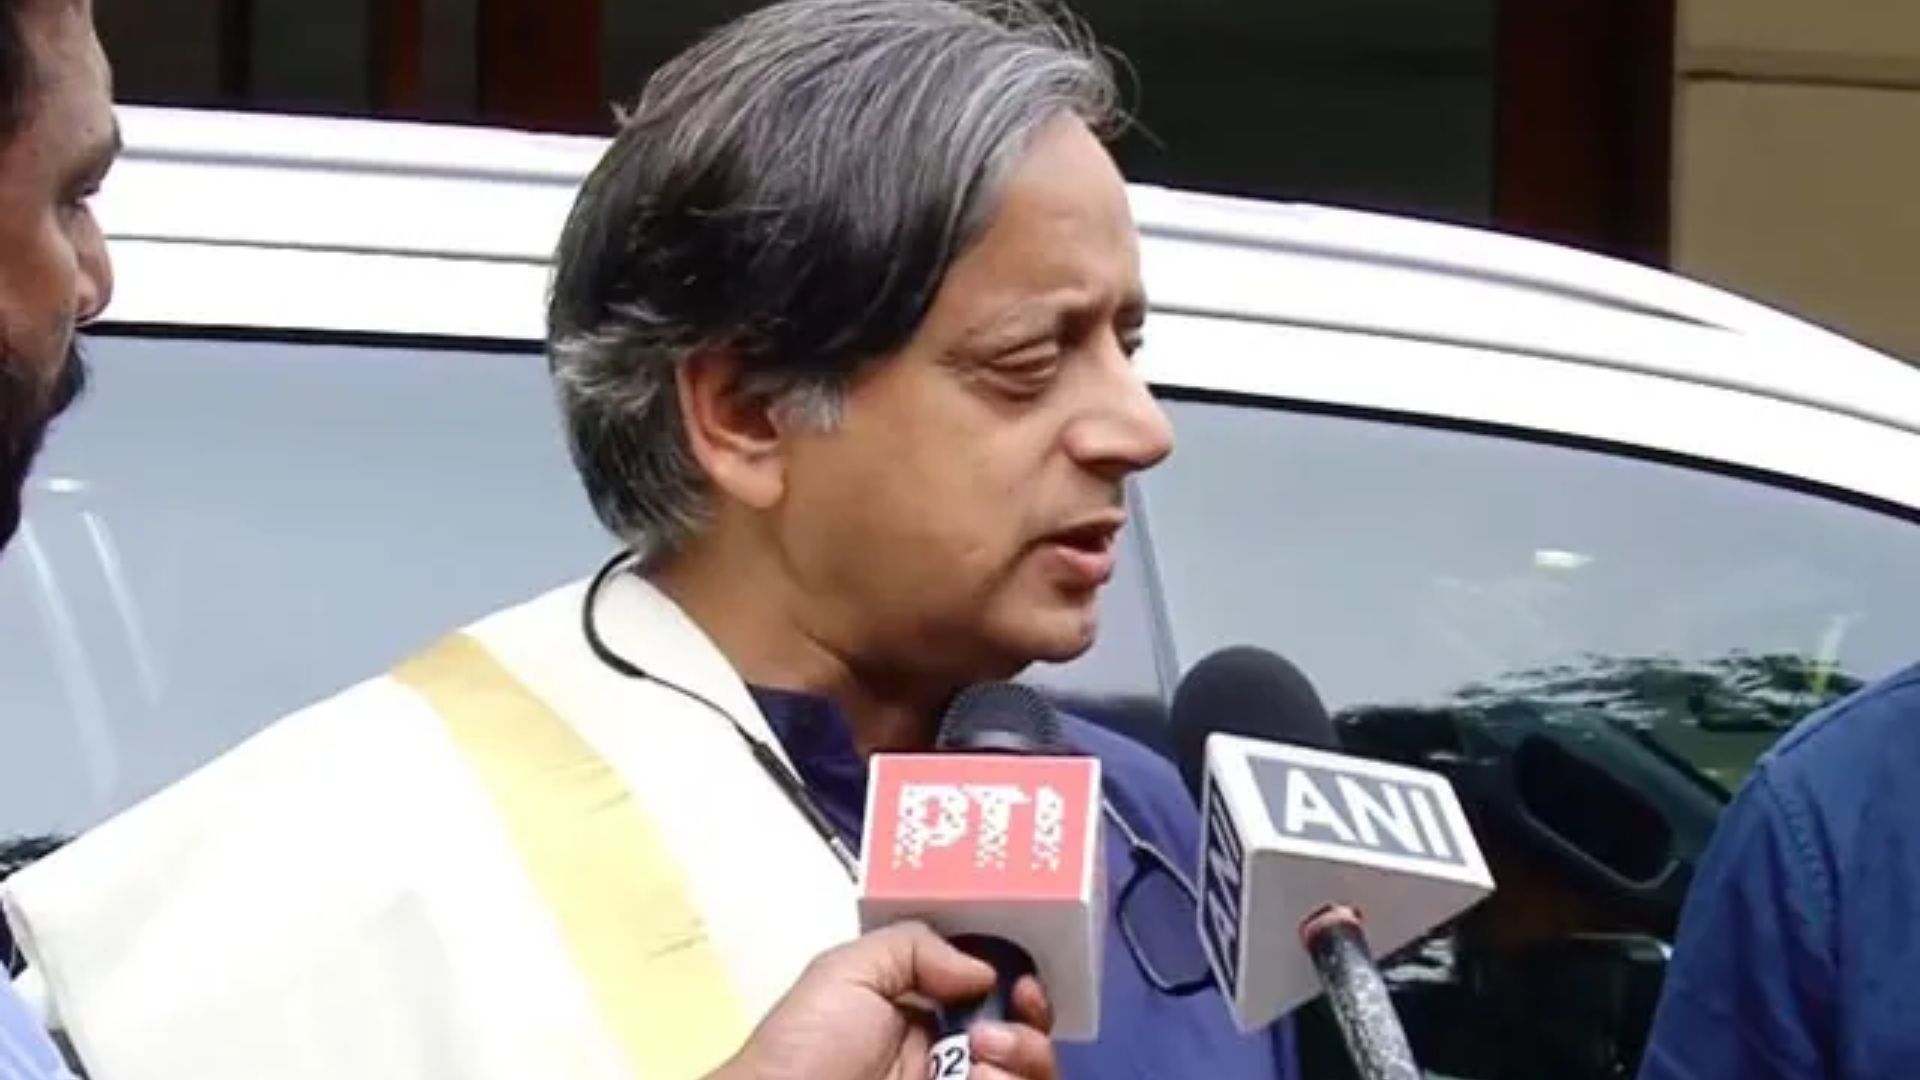 Shashi Tharoor Wins Thiruvananthapuram For Record 4th Term In Neck-And-Neck Fight